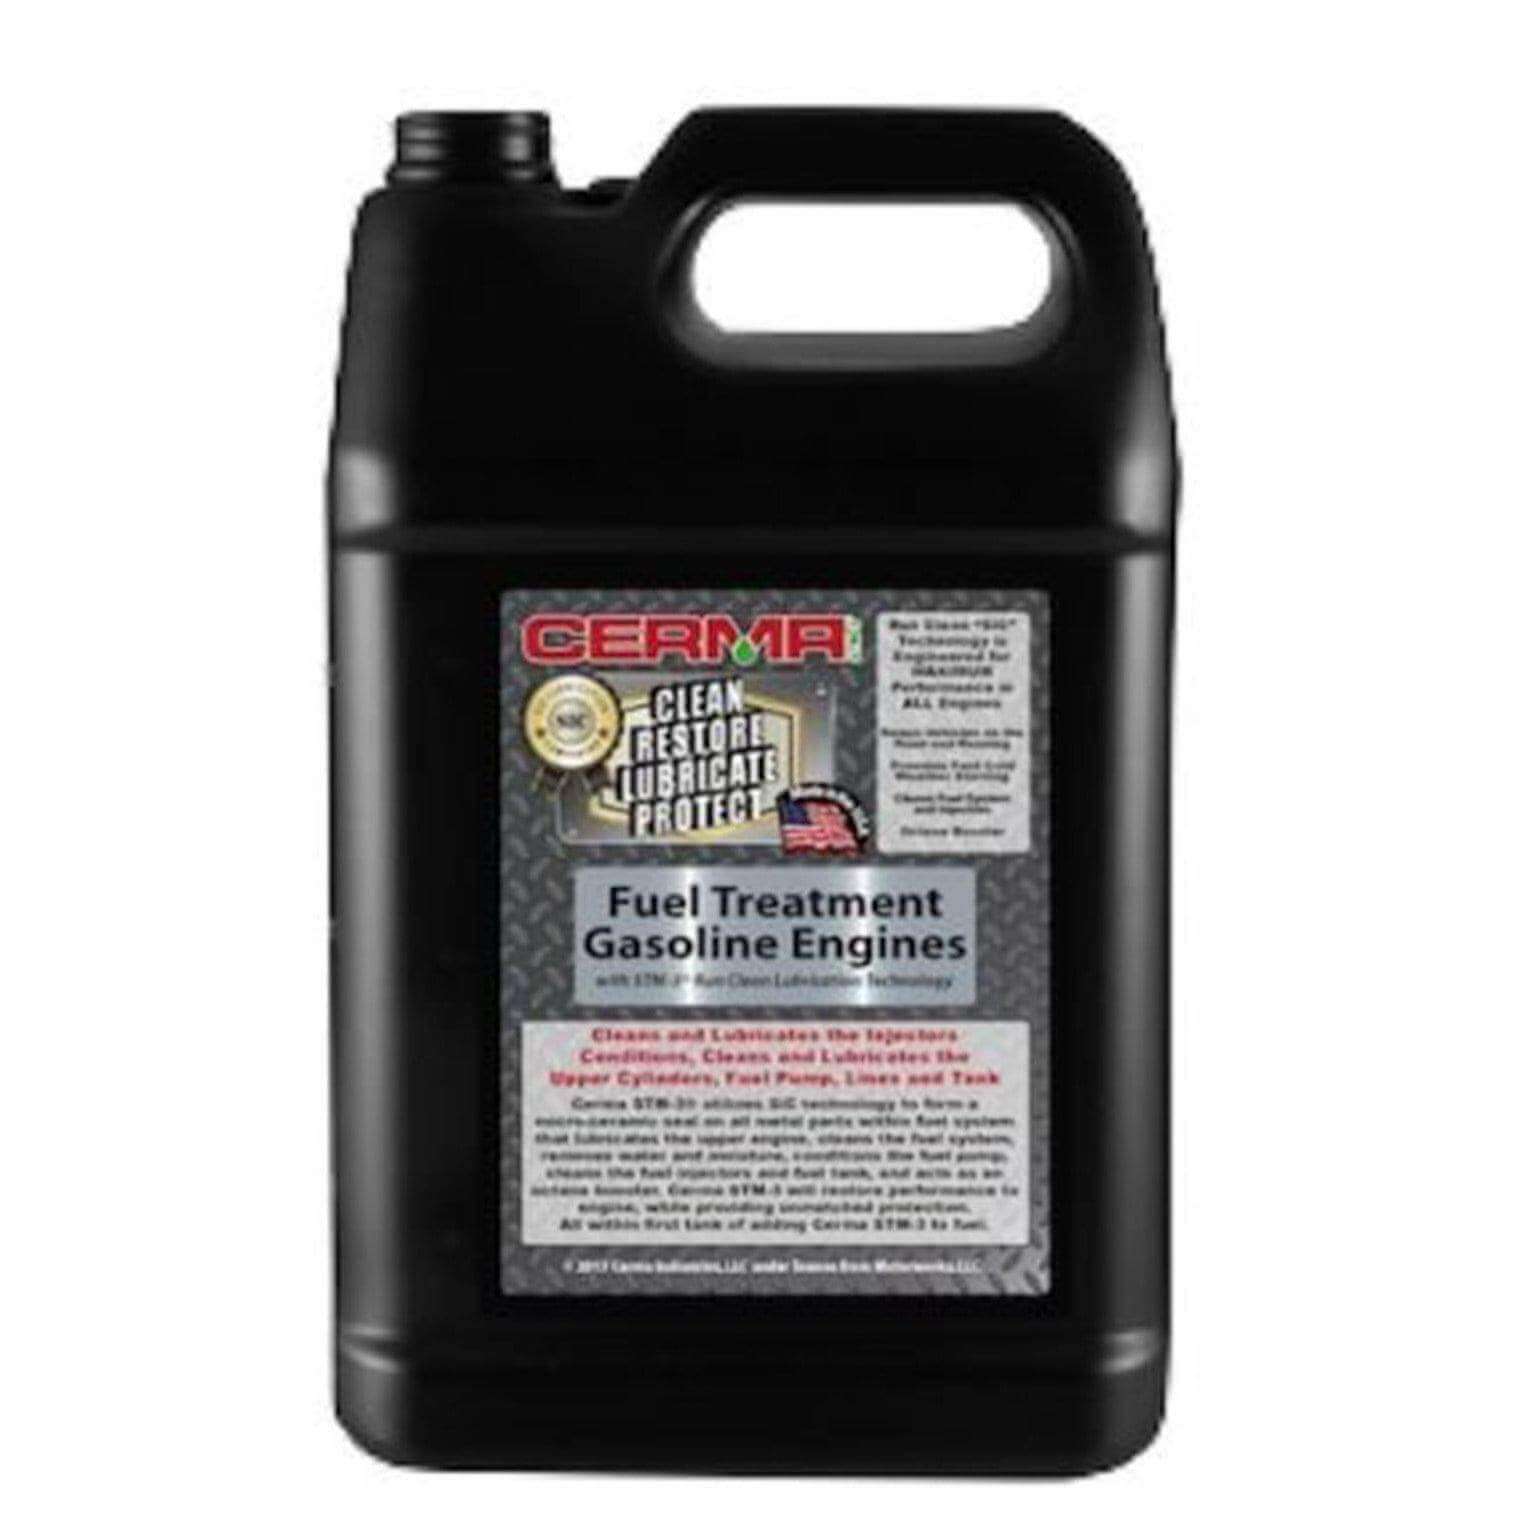 Cerma Ceramic Fuel Treatment for Gasoline Engines at $369.77 only from cermatreatment.com